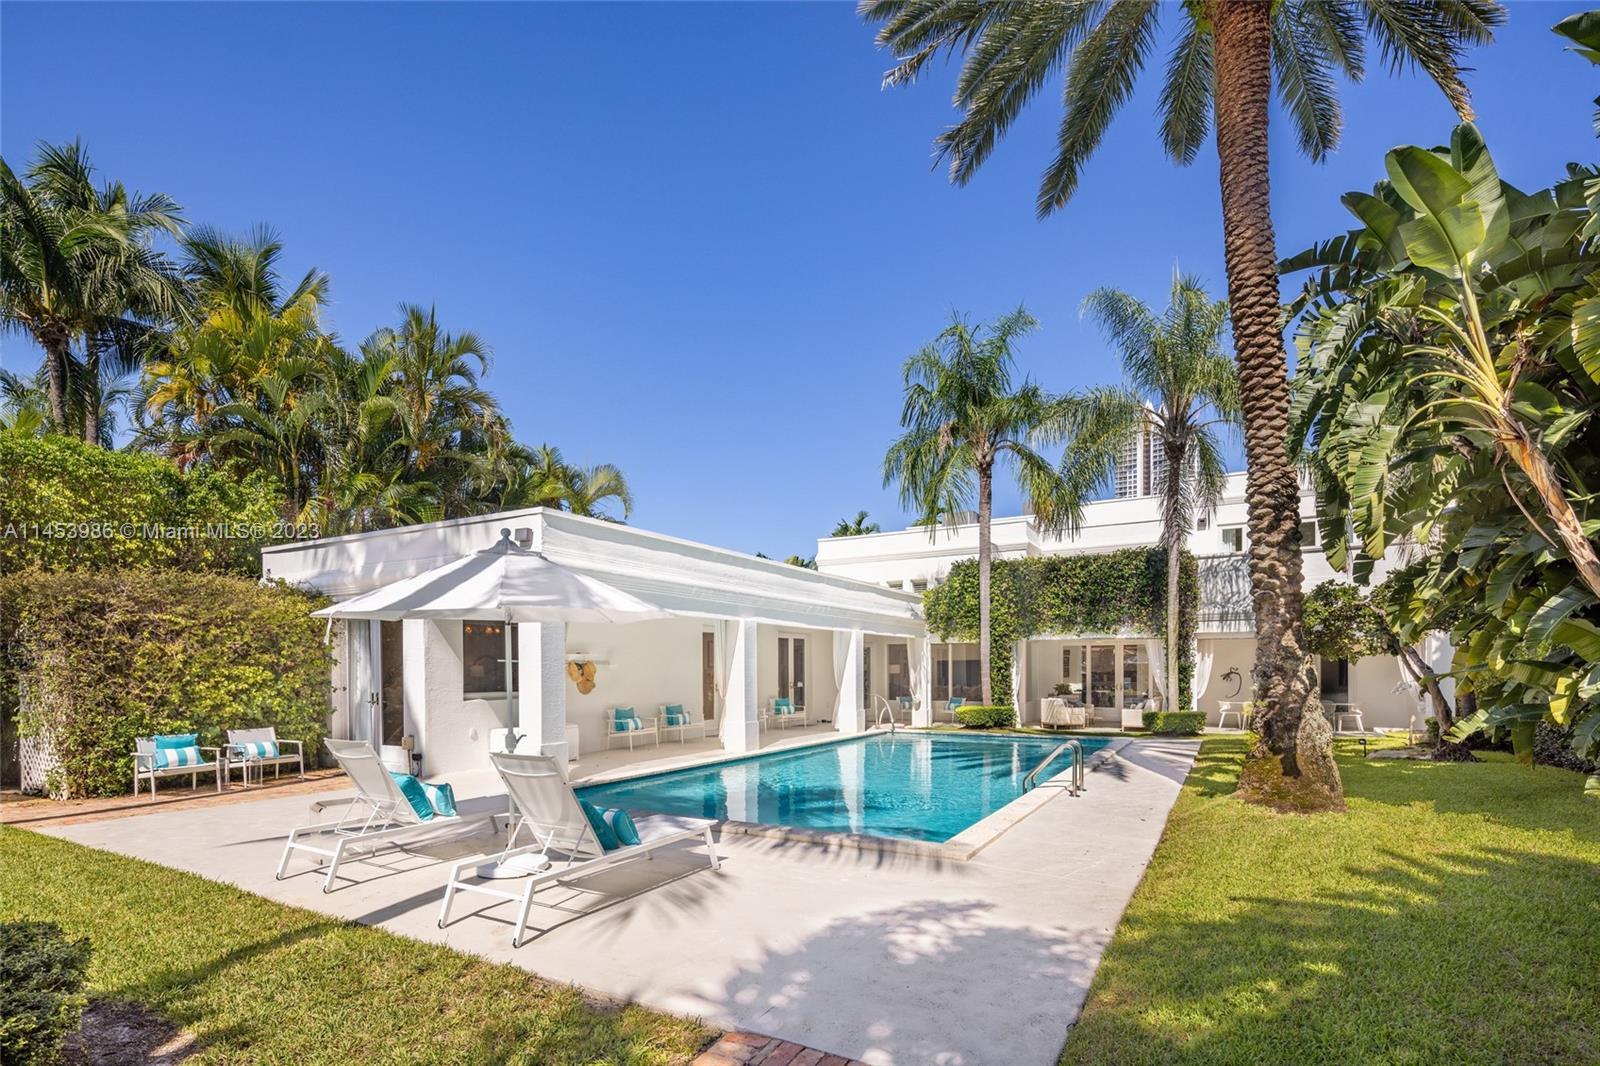 Palm Beach Meets Miami Beach! This beautiful Contemporary waterfront home sits on a lushly manicured